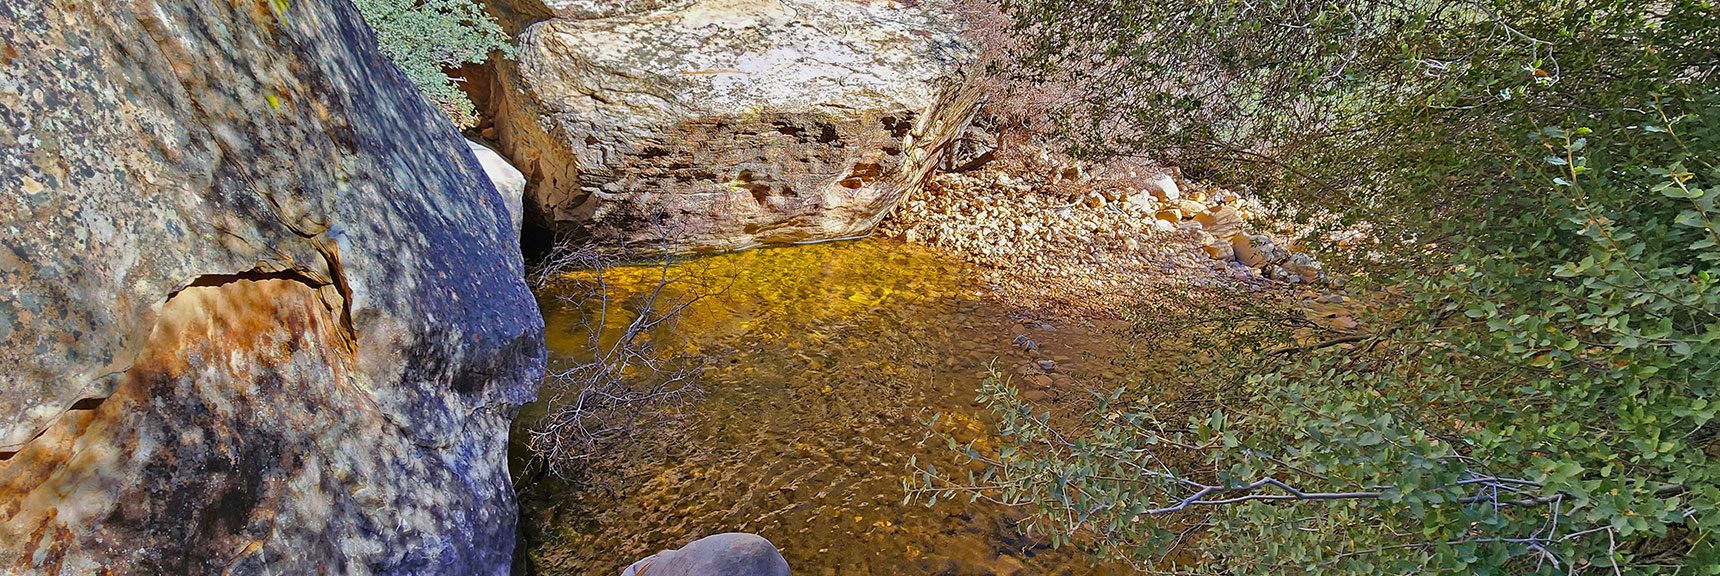 Another Quiet, Peaceful Pool. Find Route Around Boulders. | Ice Box Canyon | Red Rock Canyon NCA, Nevada | Las Vegas Area Trails | David Smith